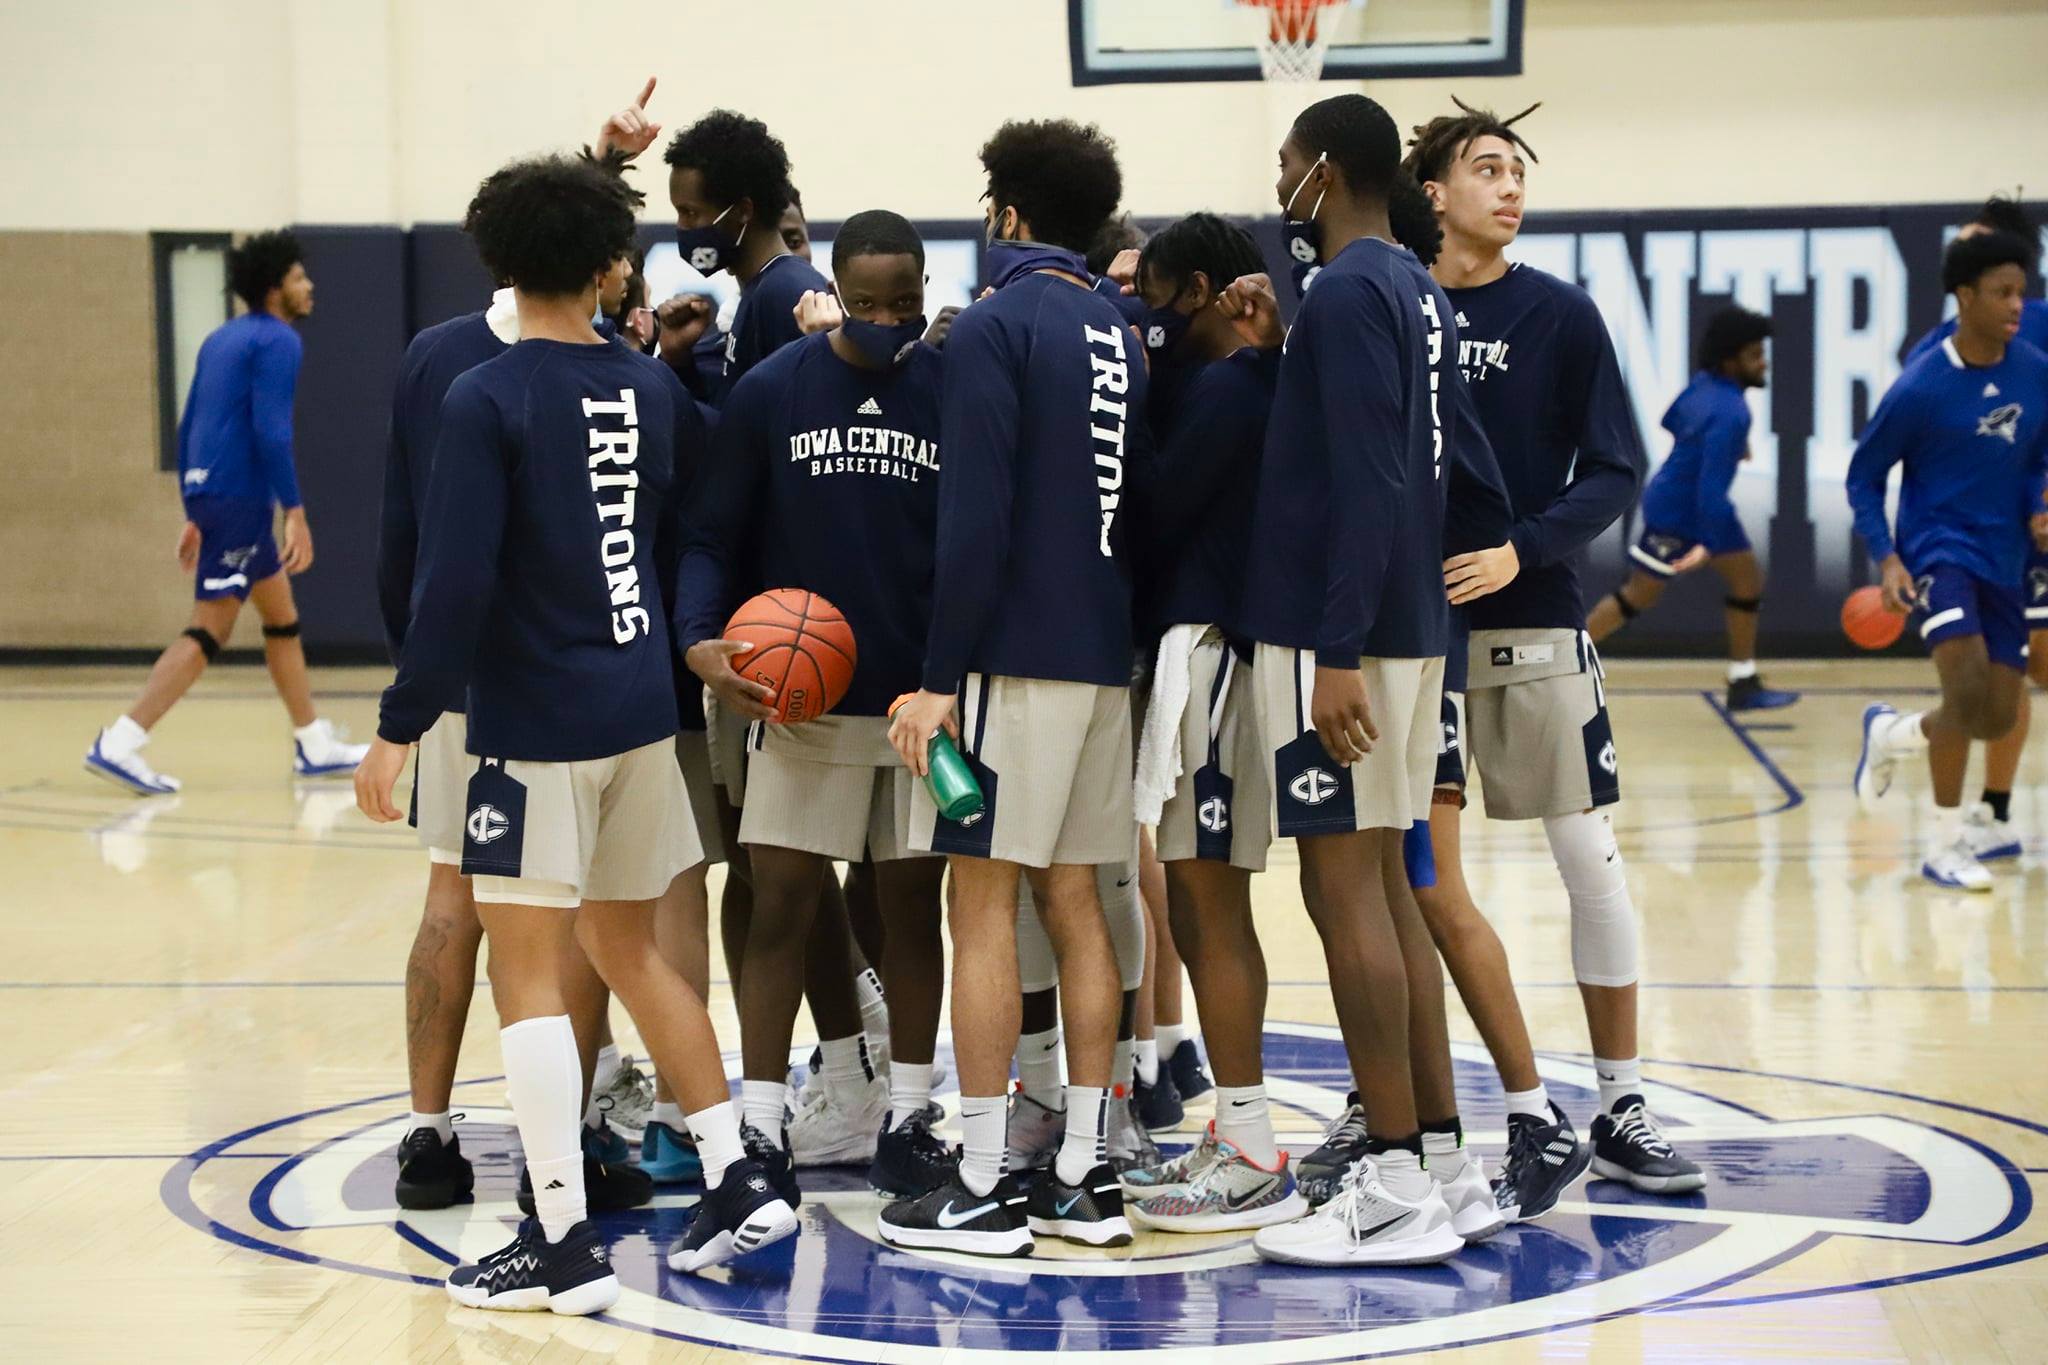 Season comes to an end for Tritons